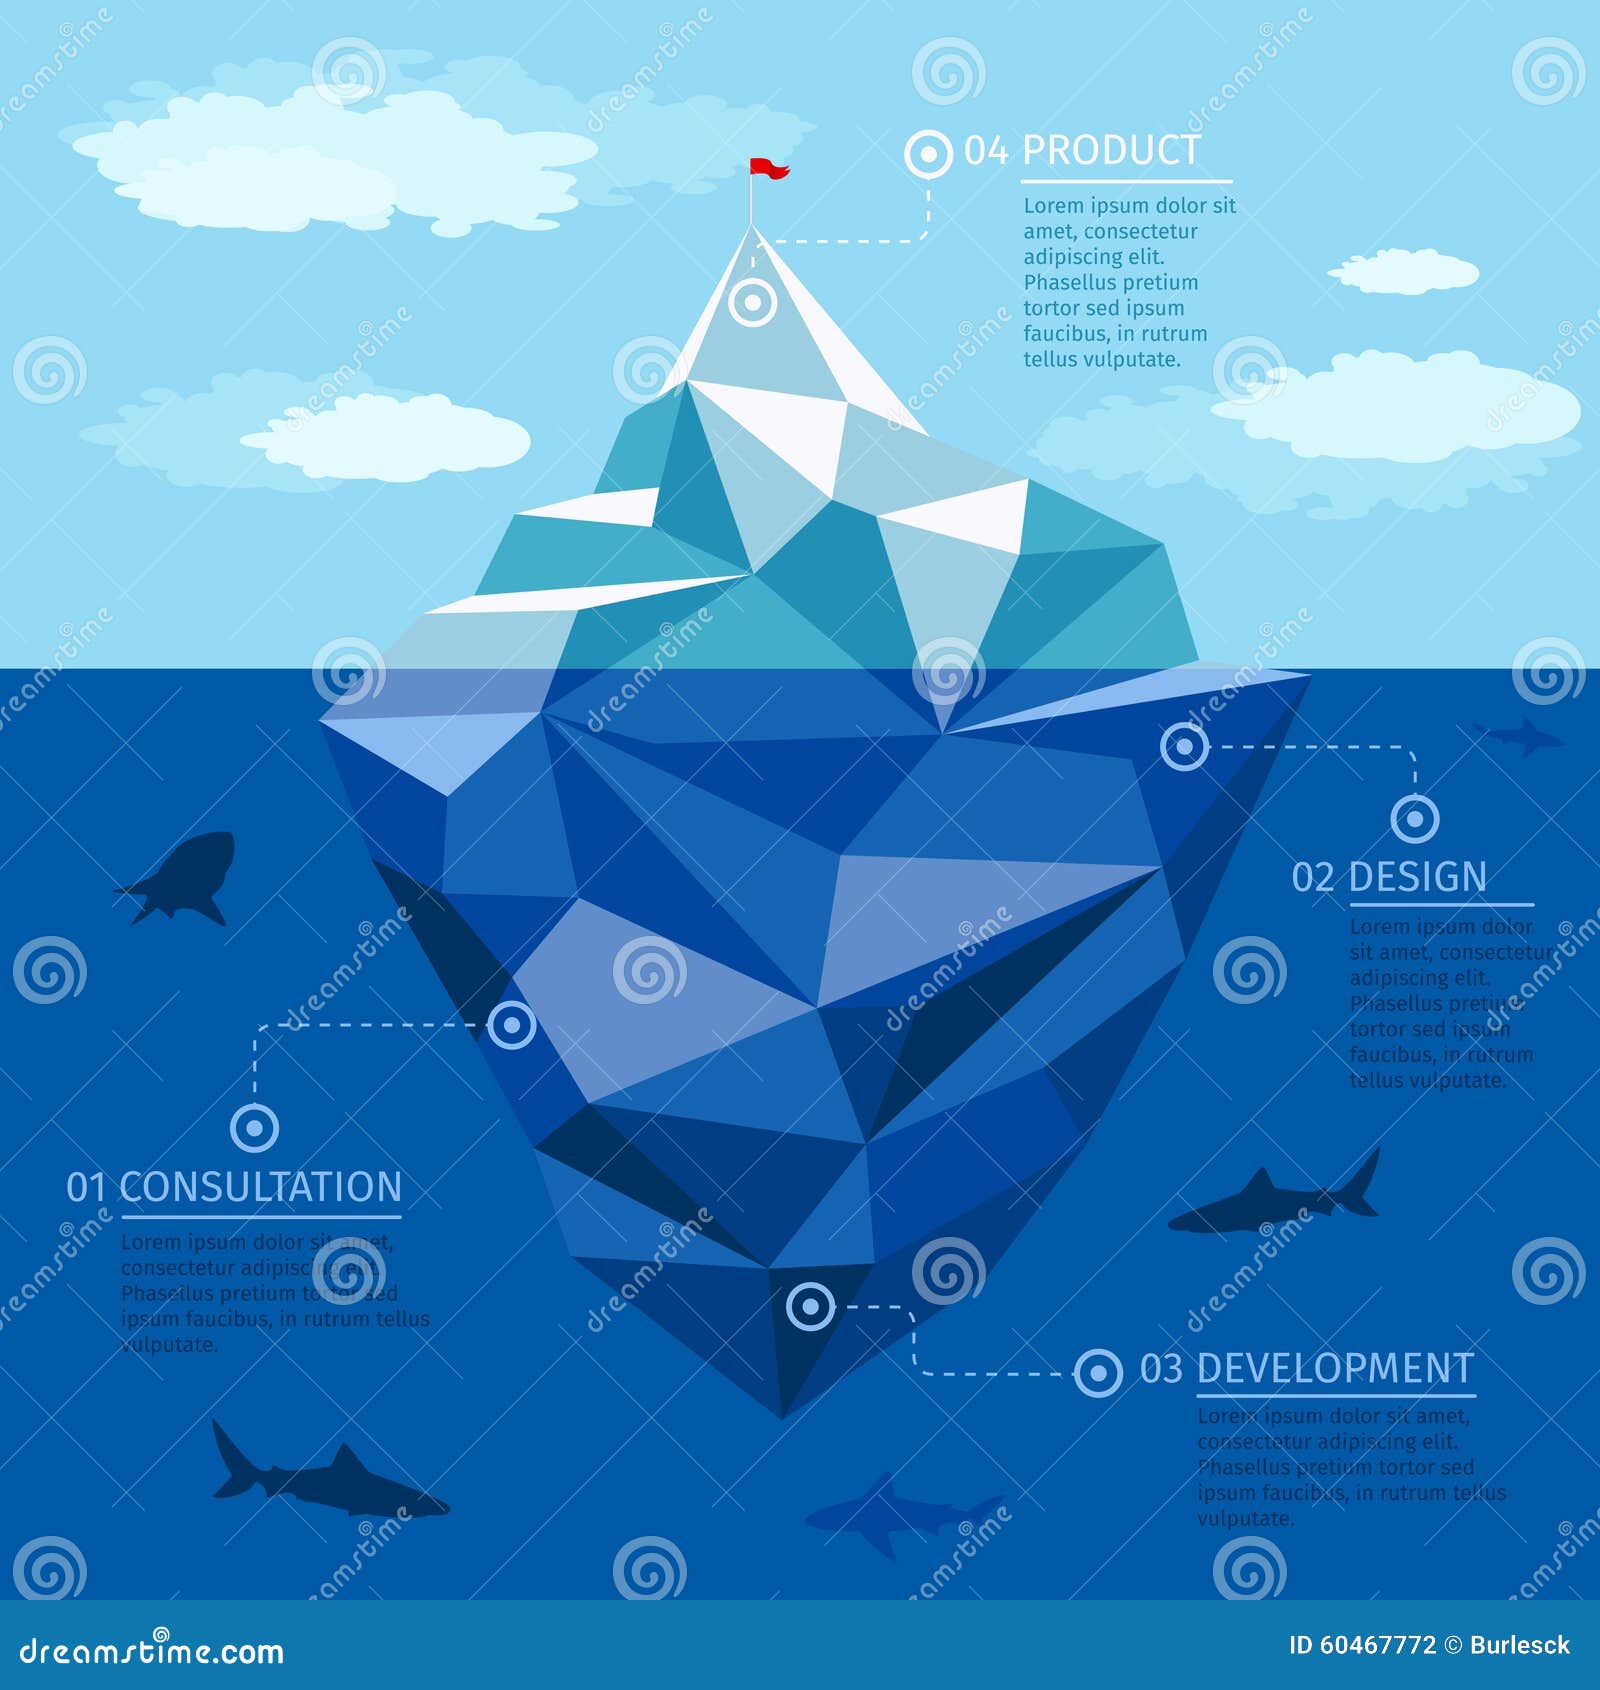 iceberg infographic  template. business